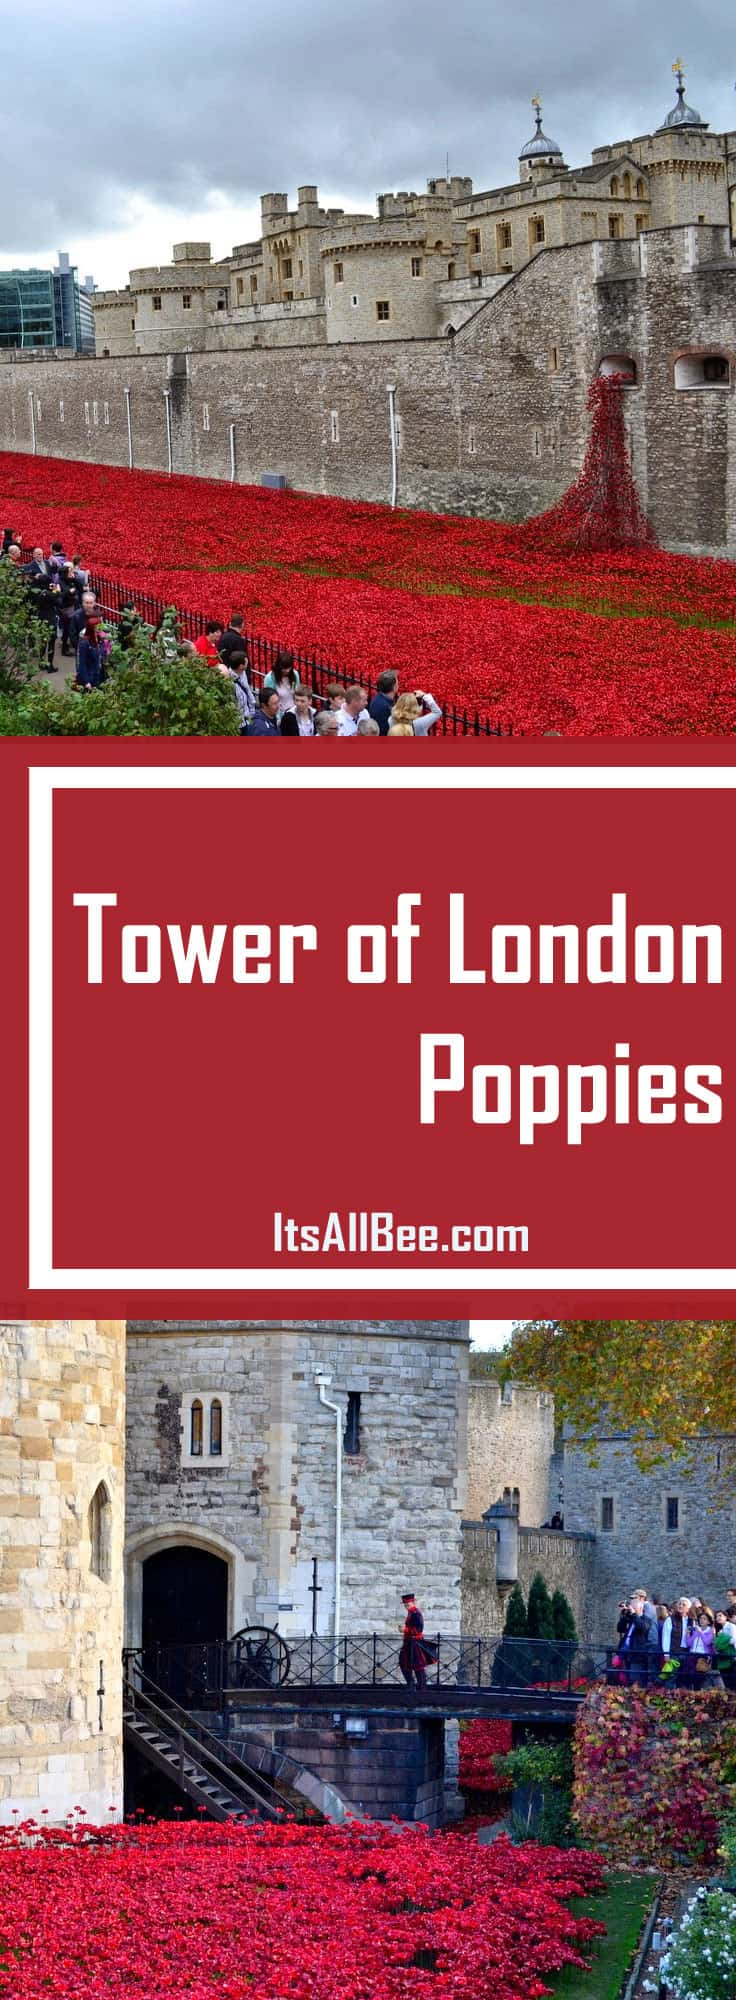 A Historical Exhibition | Tower Of London Poppies